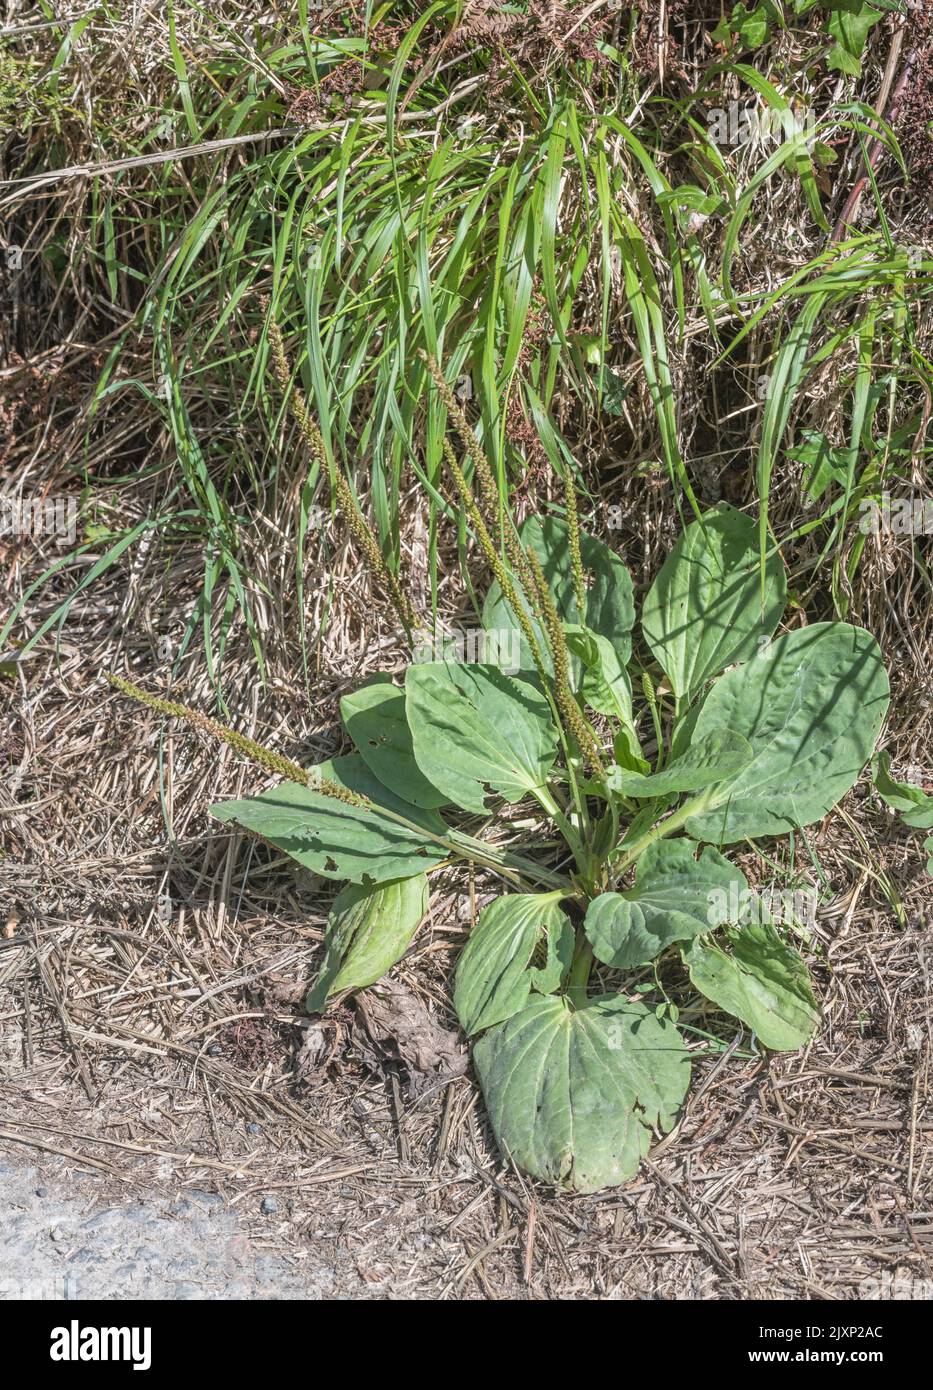 Leaves / foliage of Greater Plantain / Plantago major at the side of a field. Sometimes foraged and cooked as a survival food & former medicinal plant Stock Photo